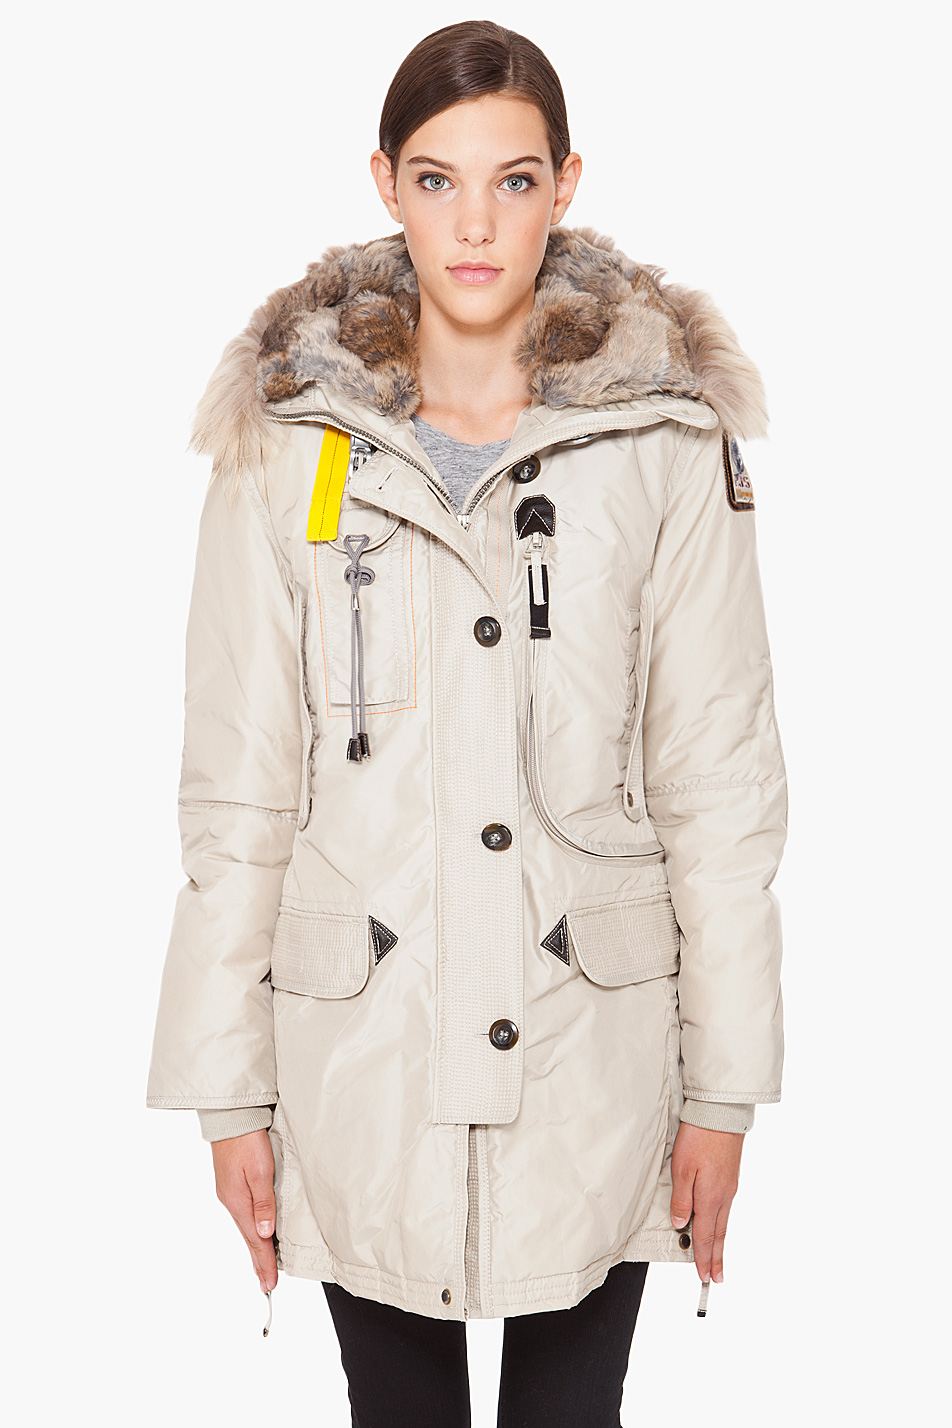 Parajumpers Kodiak Parka with Fur Trim Hood in Natural | Lyst